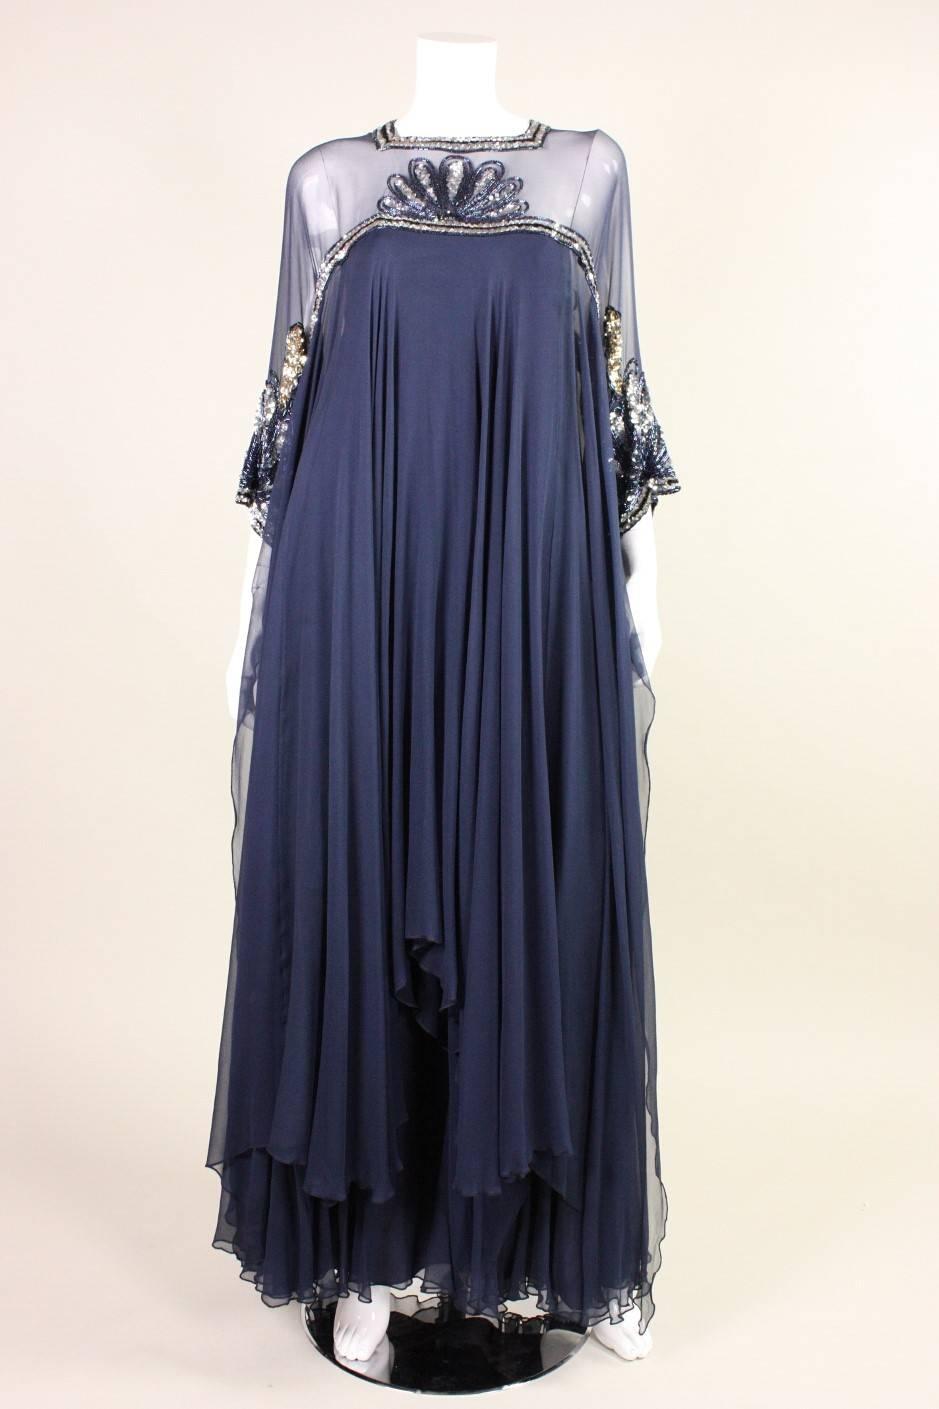 Vintage gown from Lesley Sandra dates to the 1970's and is made of layers of navy silk chiffon with a handkerchief hem.  Sequined and beaded detailing at front and back neckline and sleeves.  Fully lined.  Center back zipper.

Measurements-
Bust: